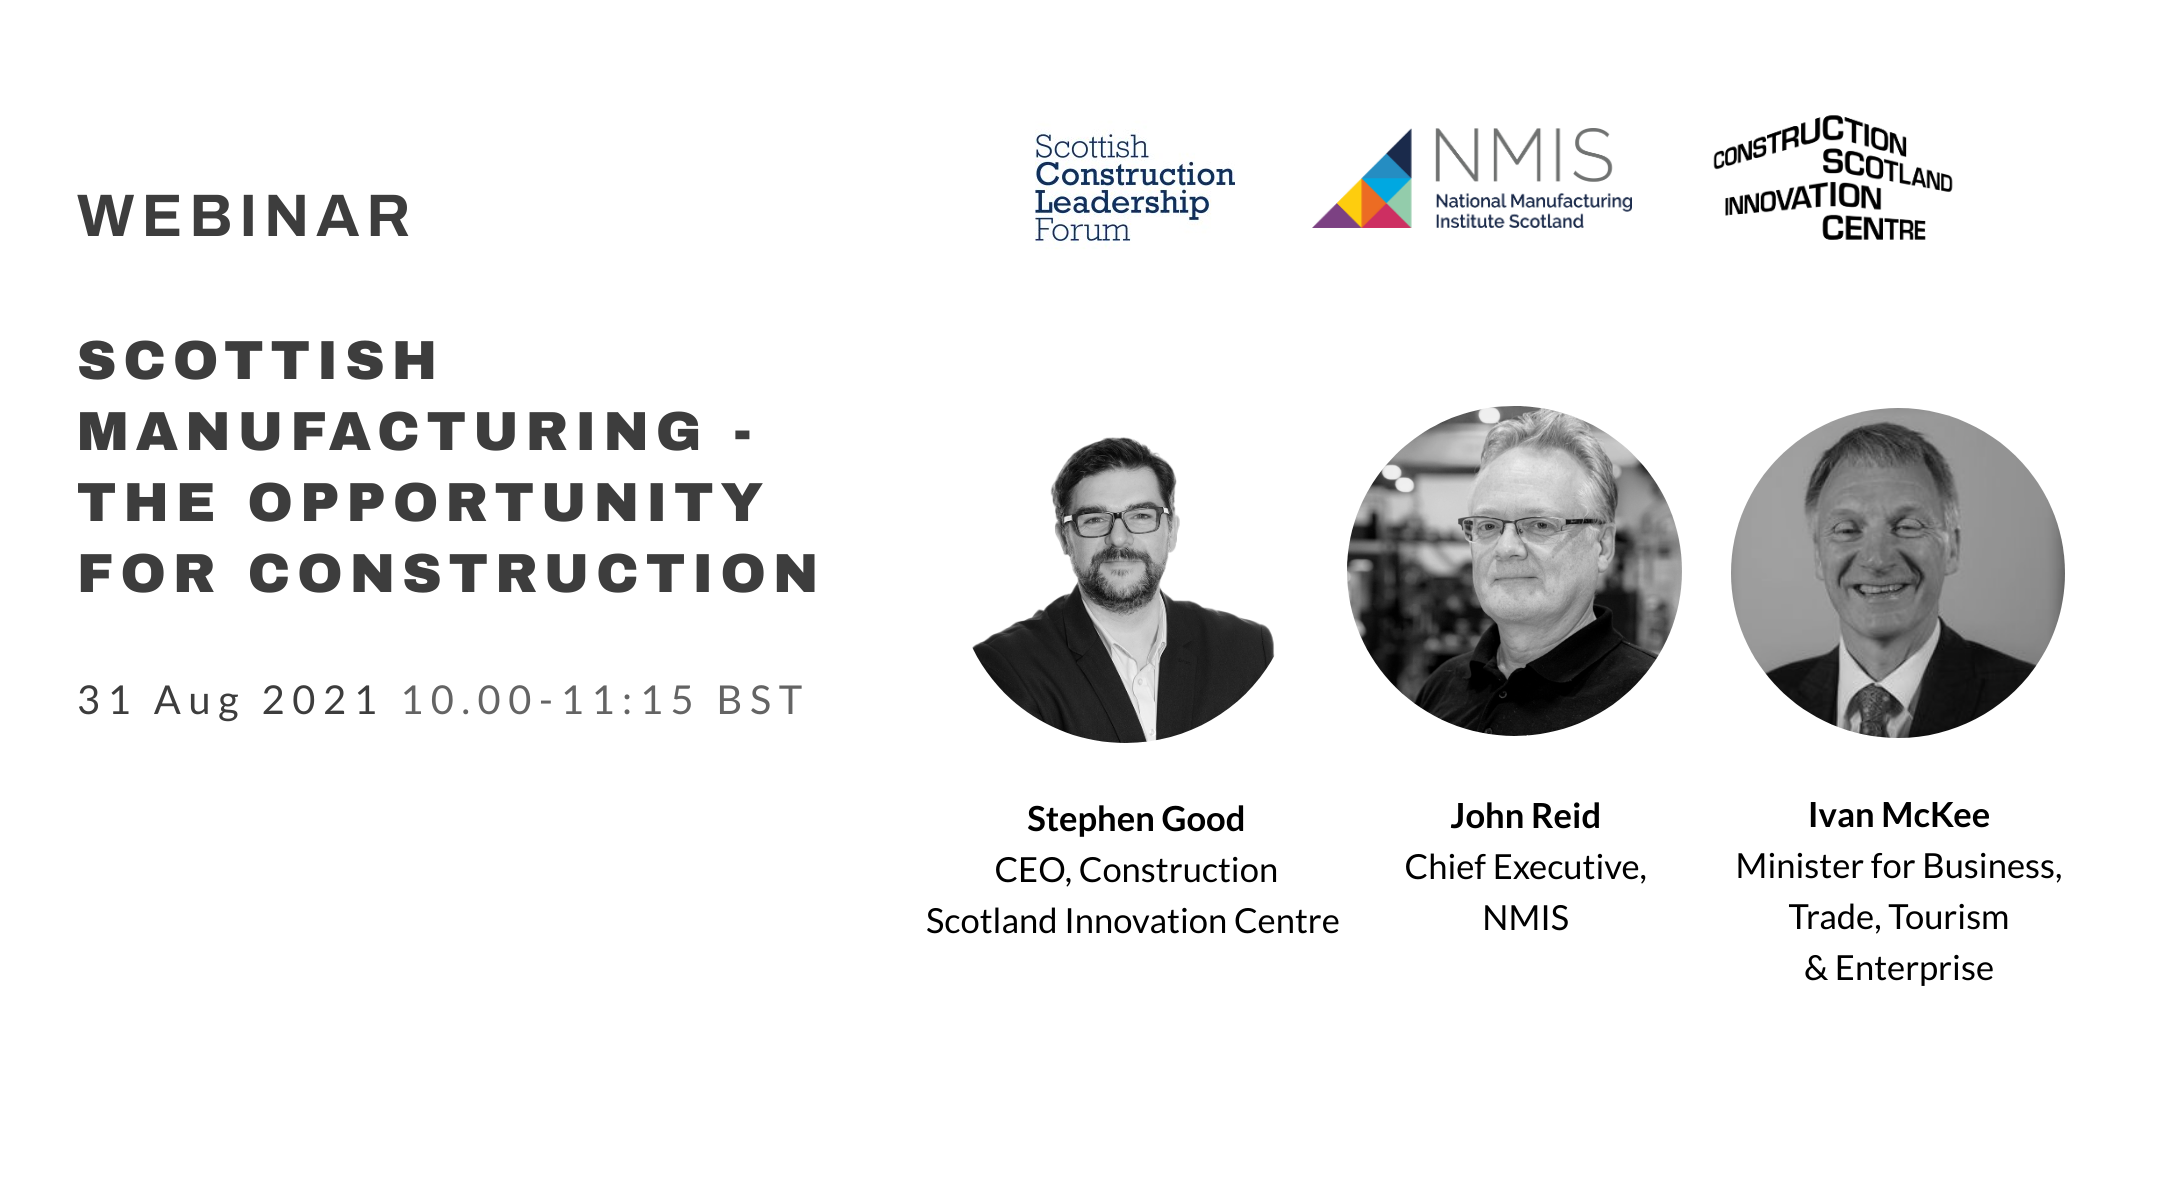 Scottish Construction Leadership Forum event to outline manufacturing supply chain opportunities